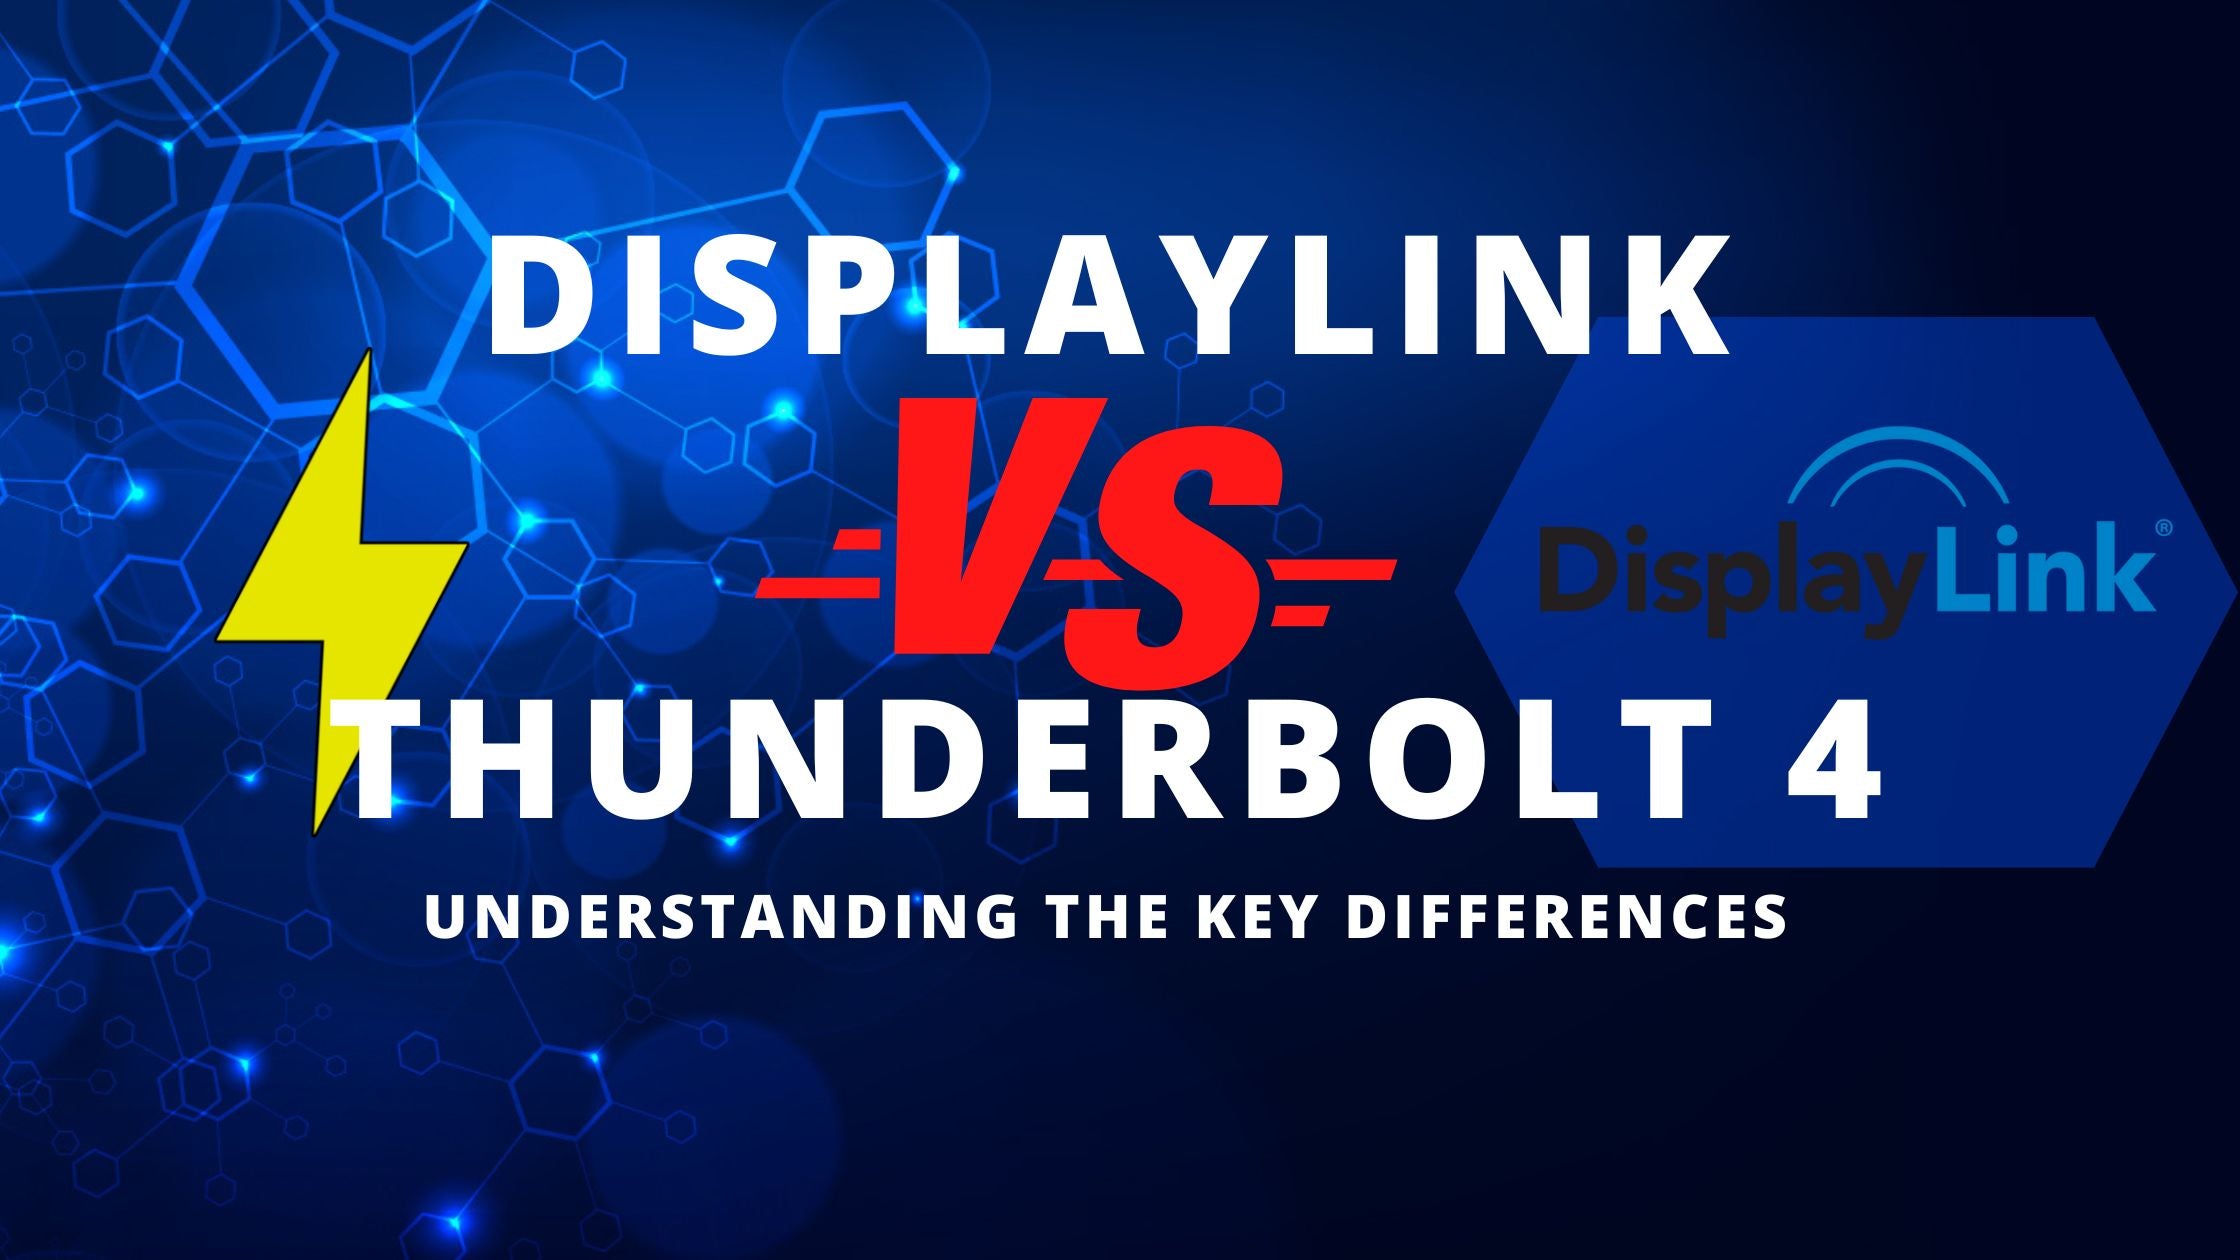 USB-C vs Thunderbolt 4 - The Differences Explained In Under 5